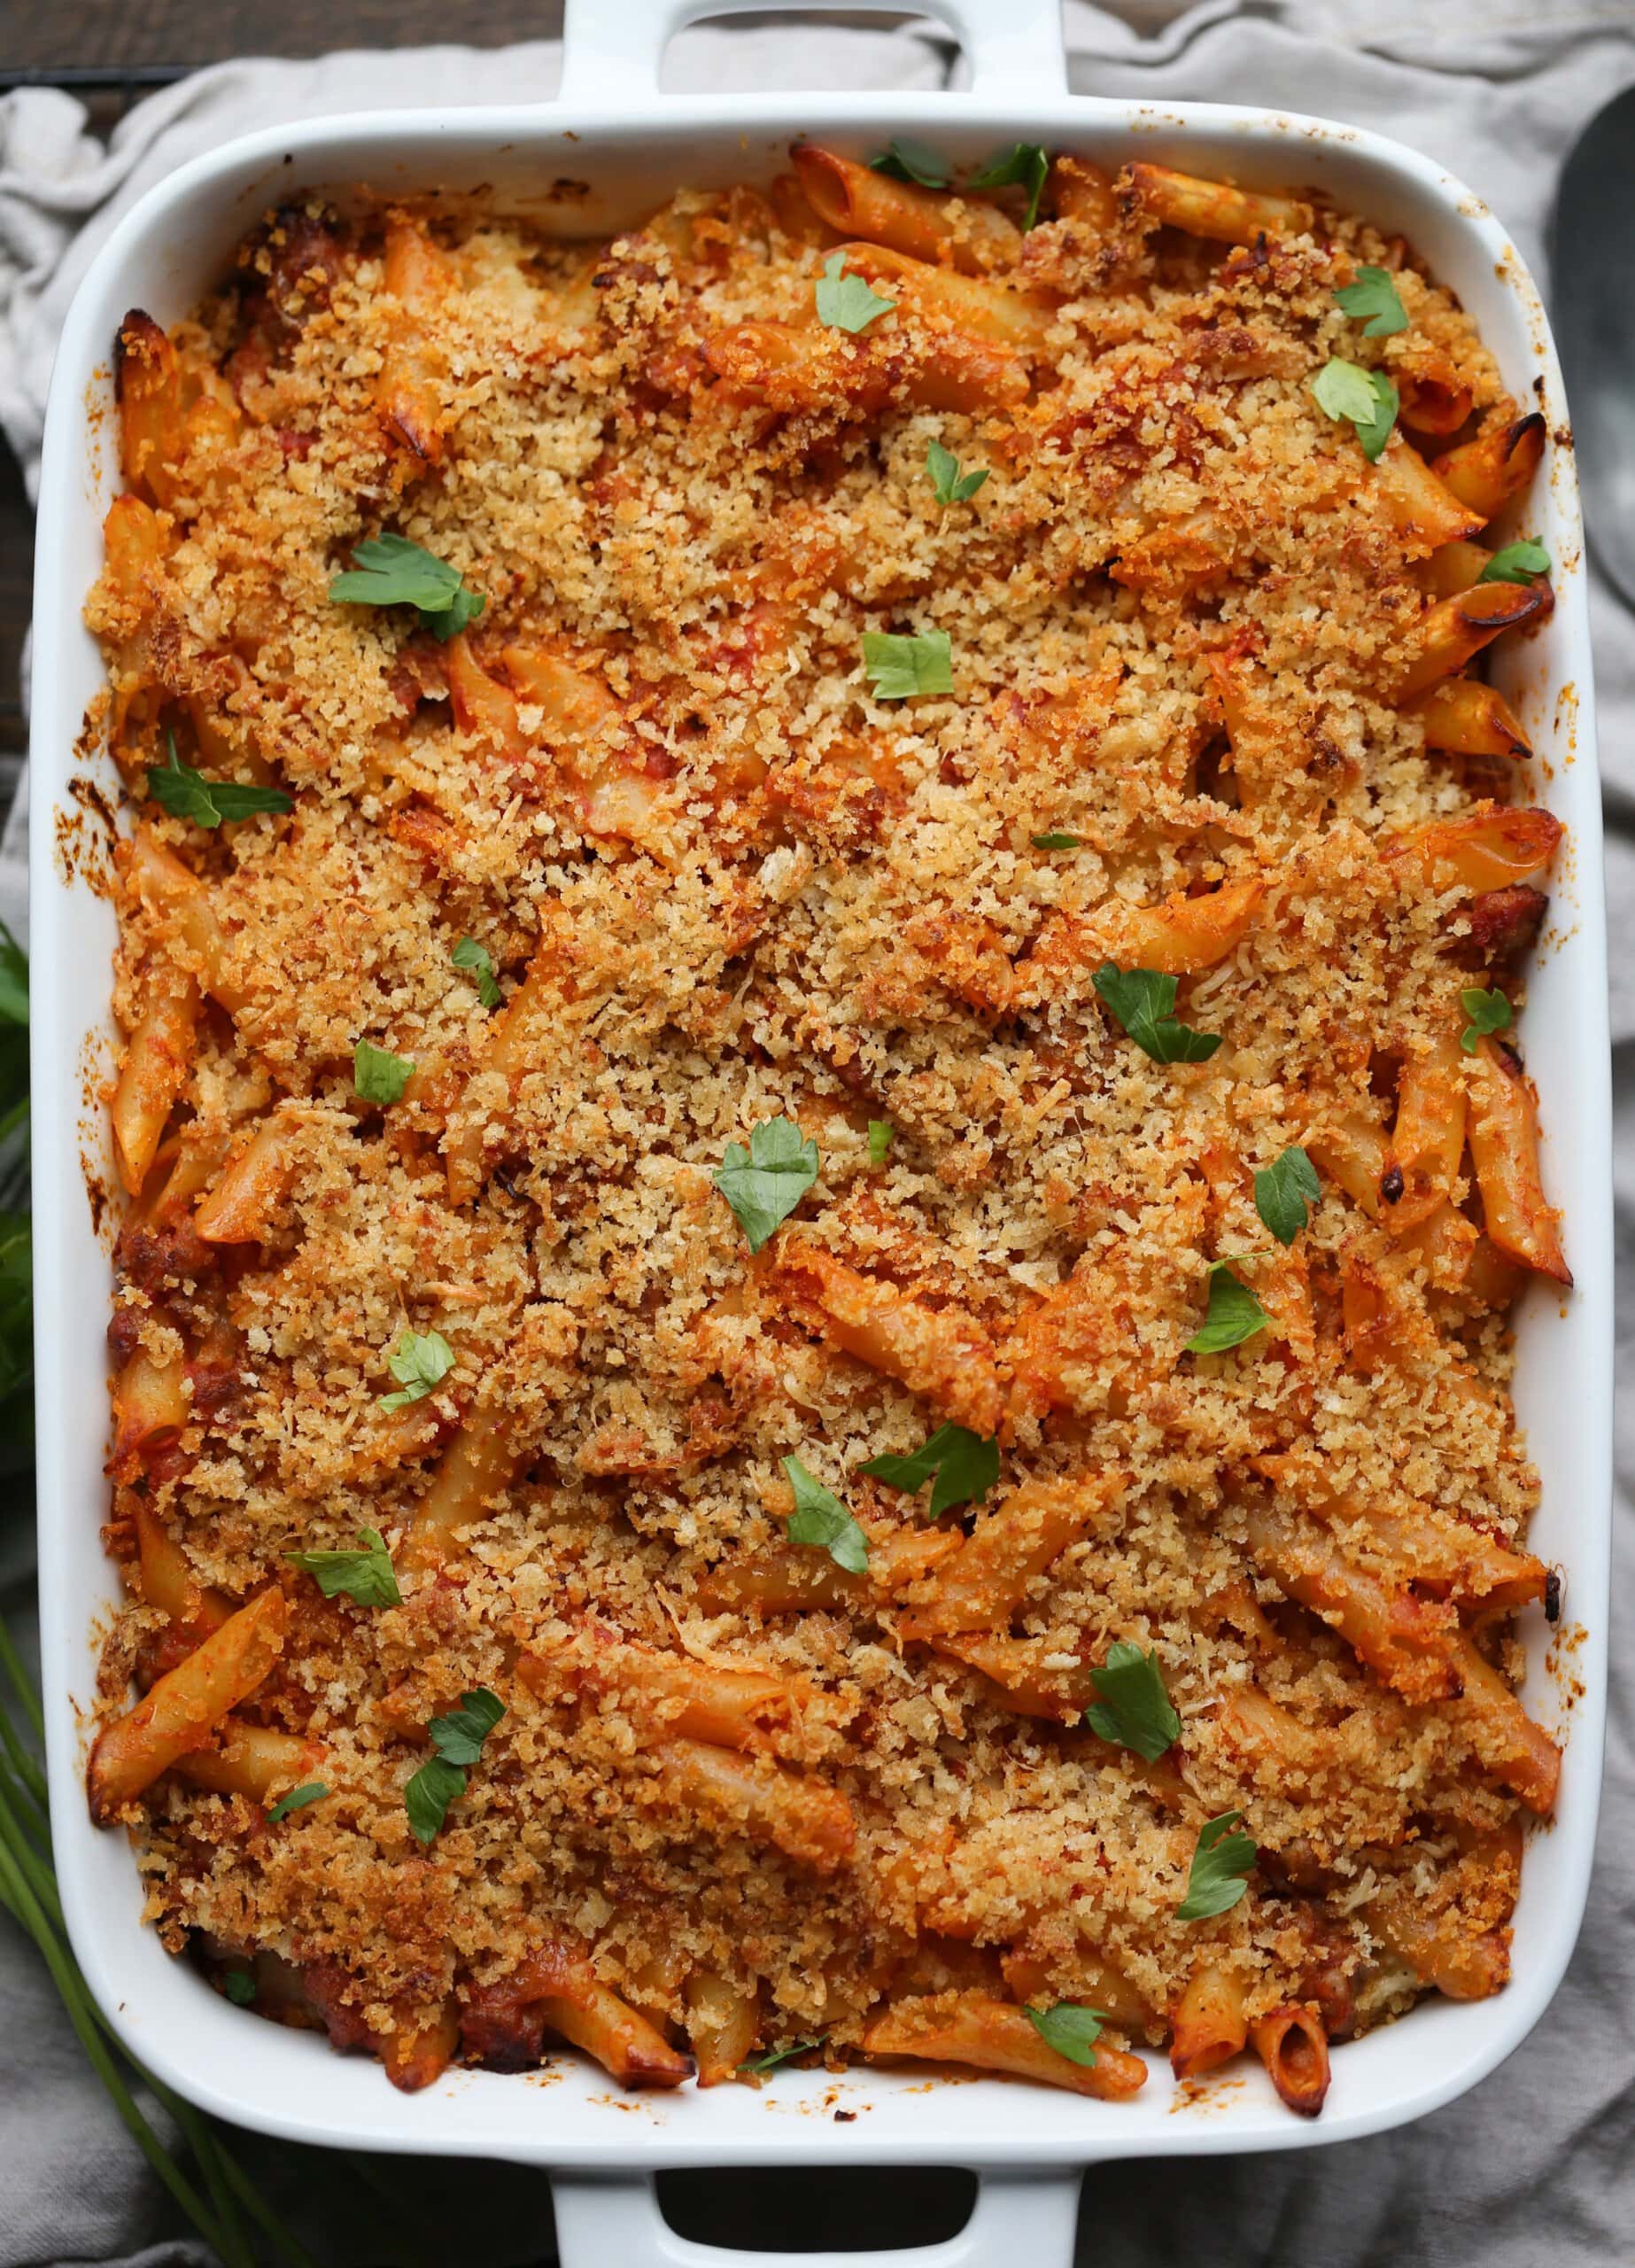 Baked mostaccioli topped with parmesan cheese, breadcrumbs and fresh herbs.